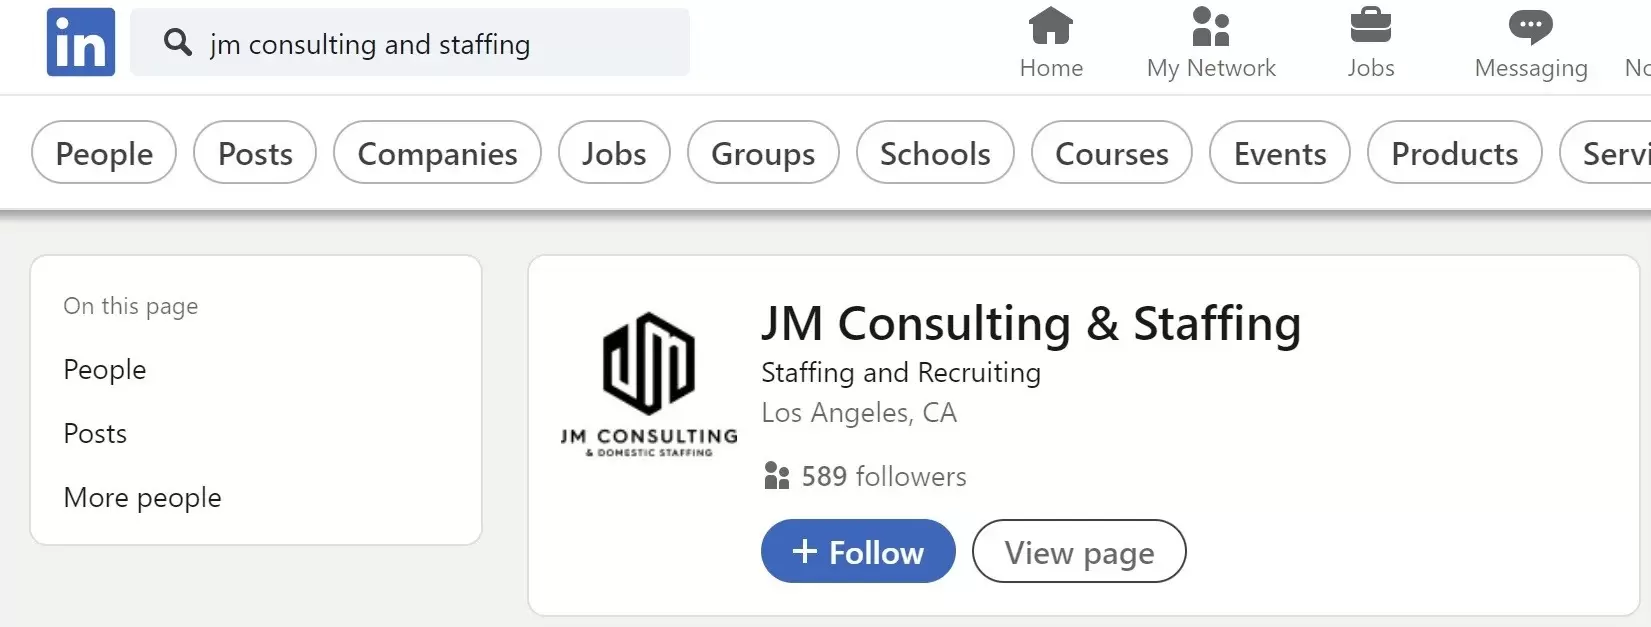 JM Consulting and Staffing